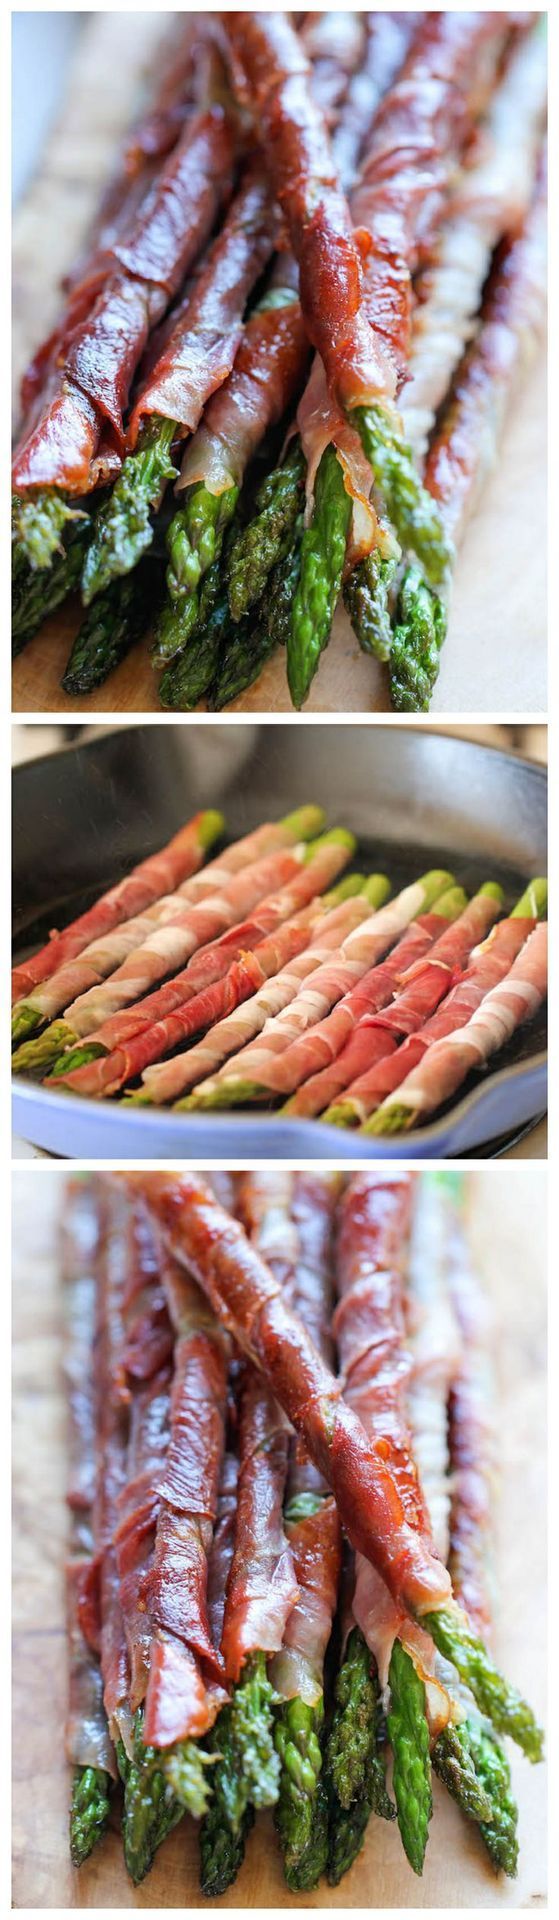 Prosciutto Wrapped Asparagus – The easiest most tastiest appetizer withjust 2 ingredients and 10 min prep!